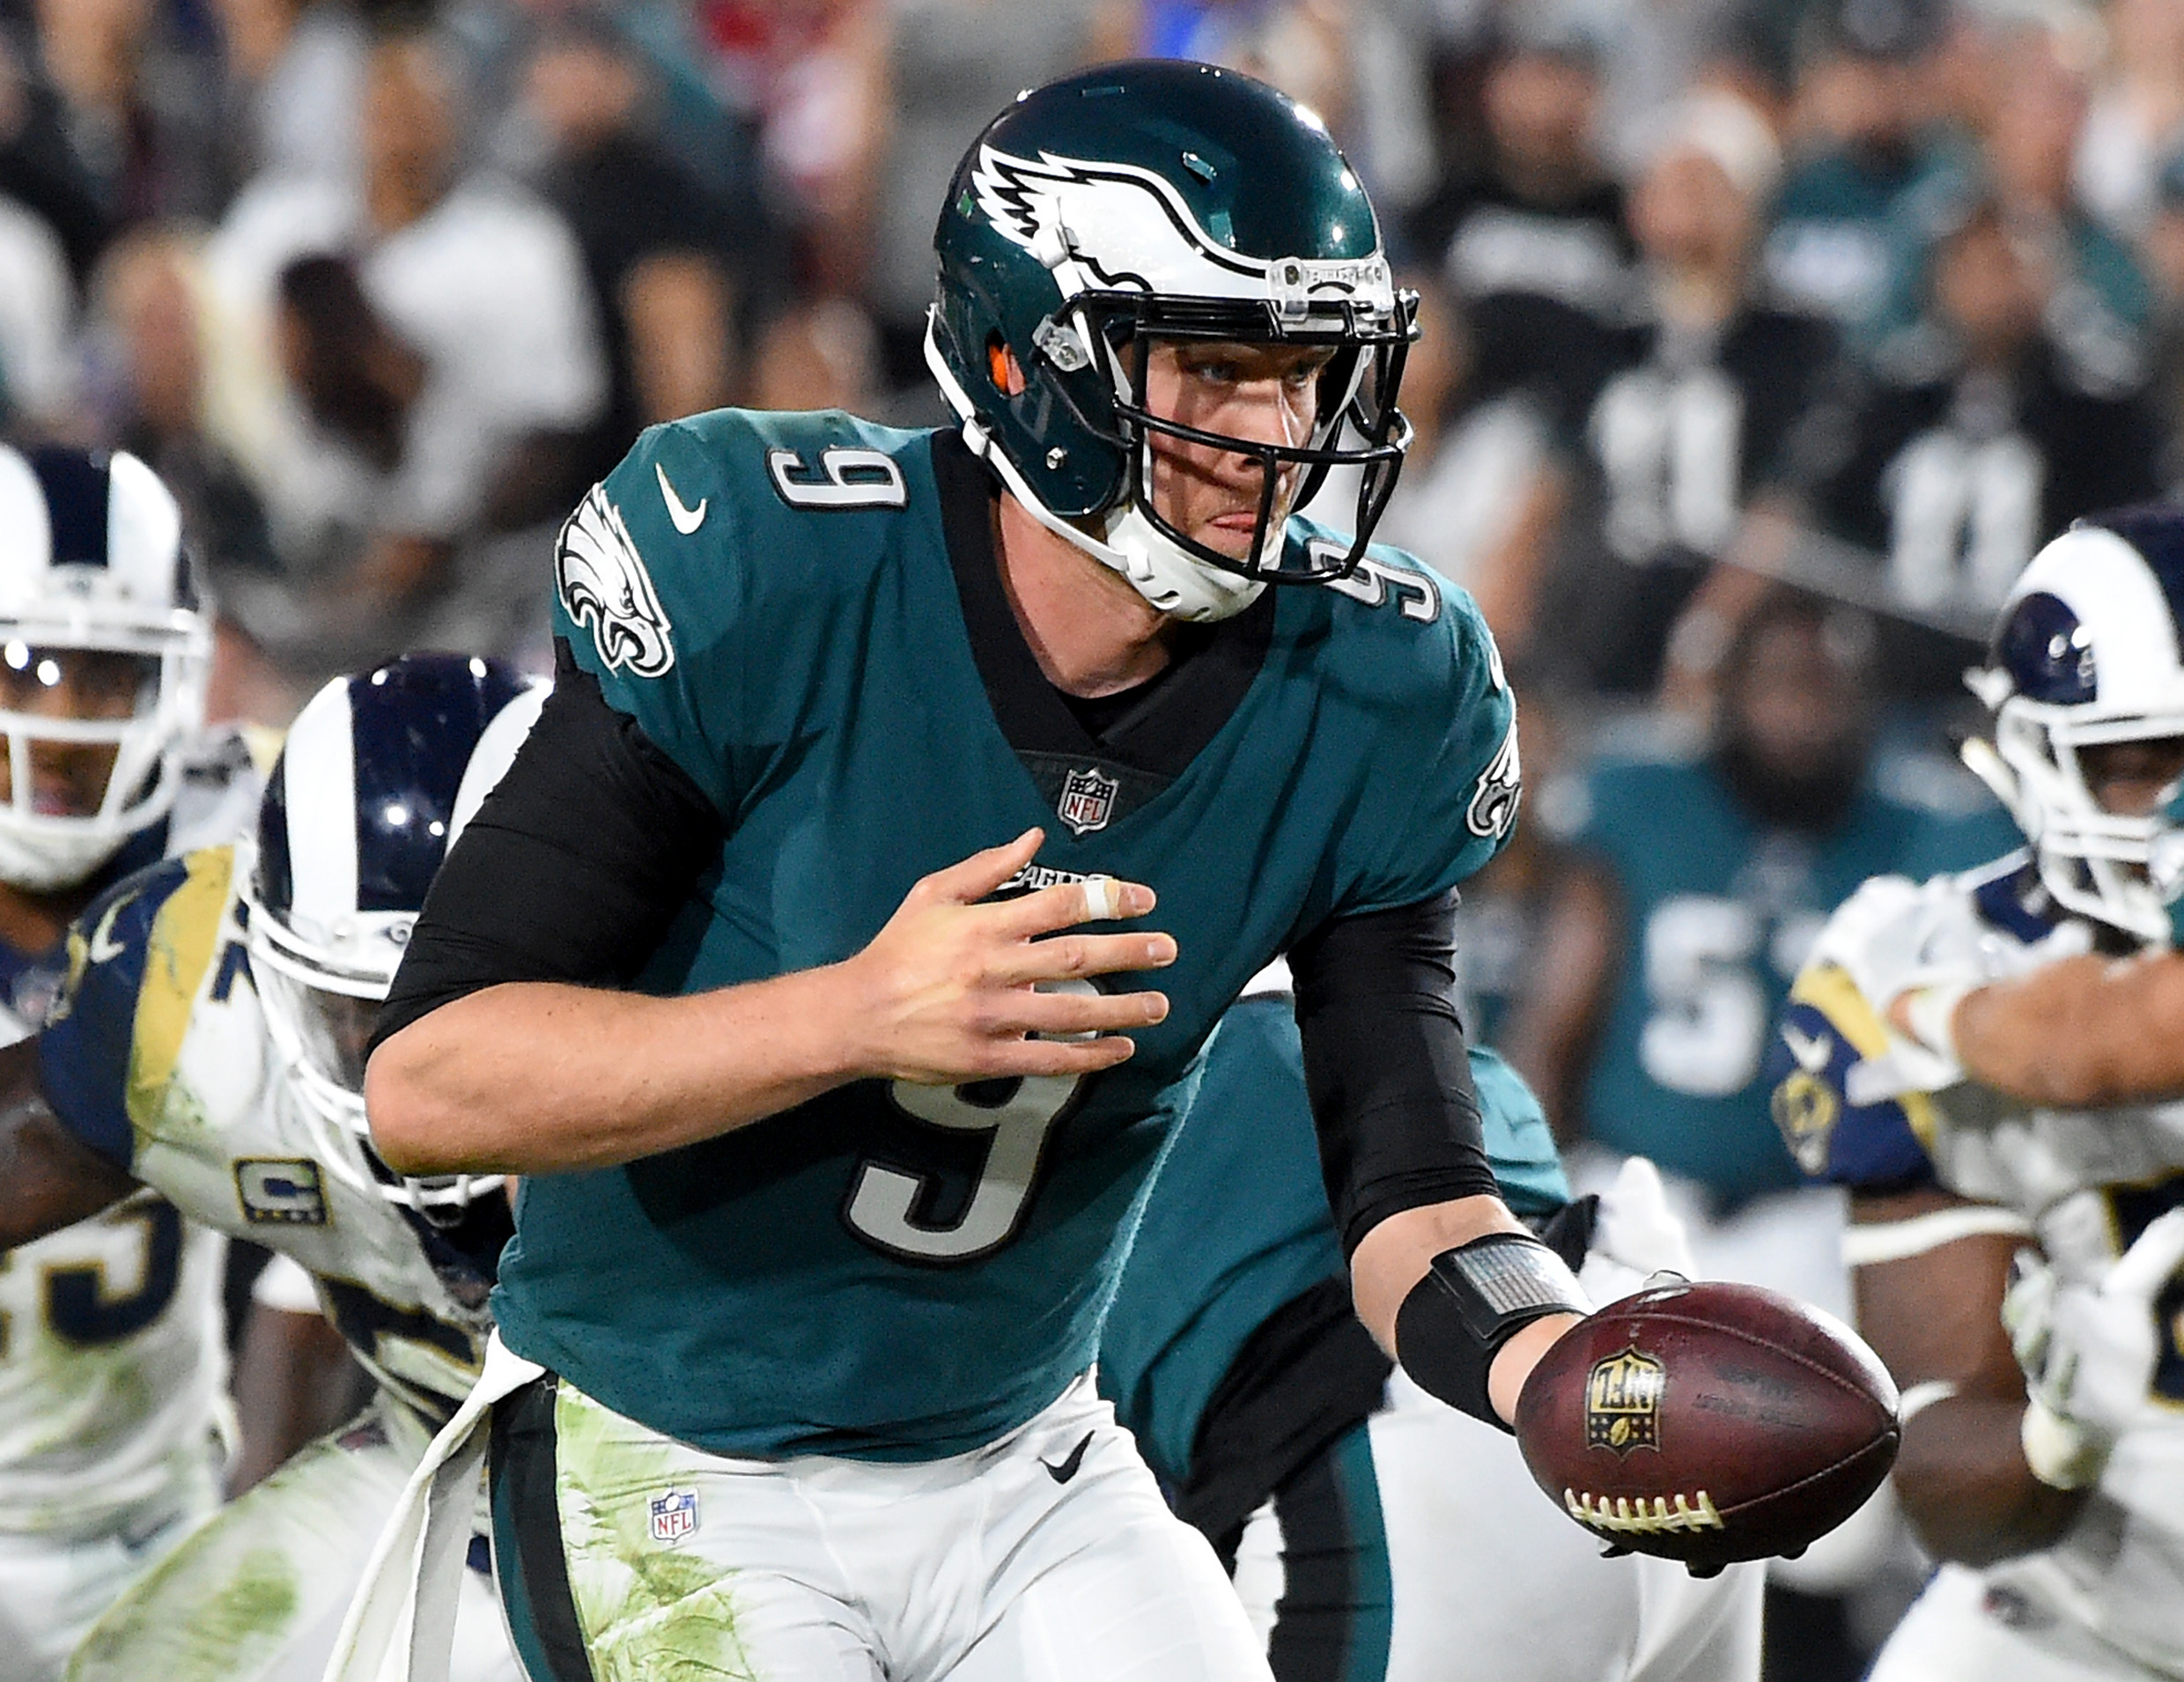 Odds Makers Like the Eagles in the Playoffs, Even Without Carson Wentz